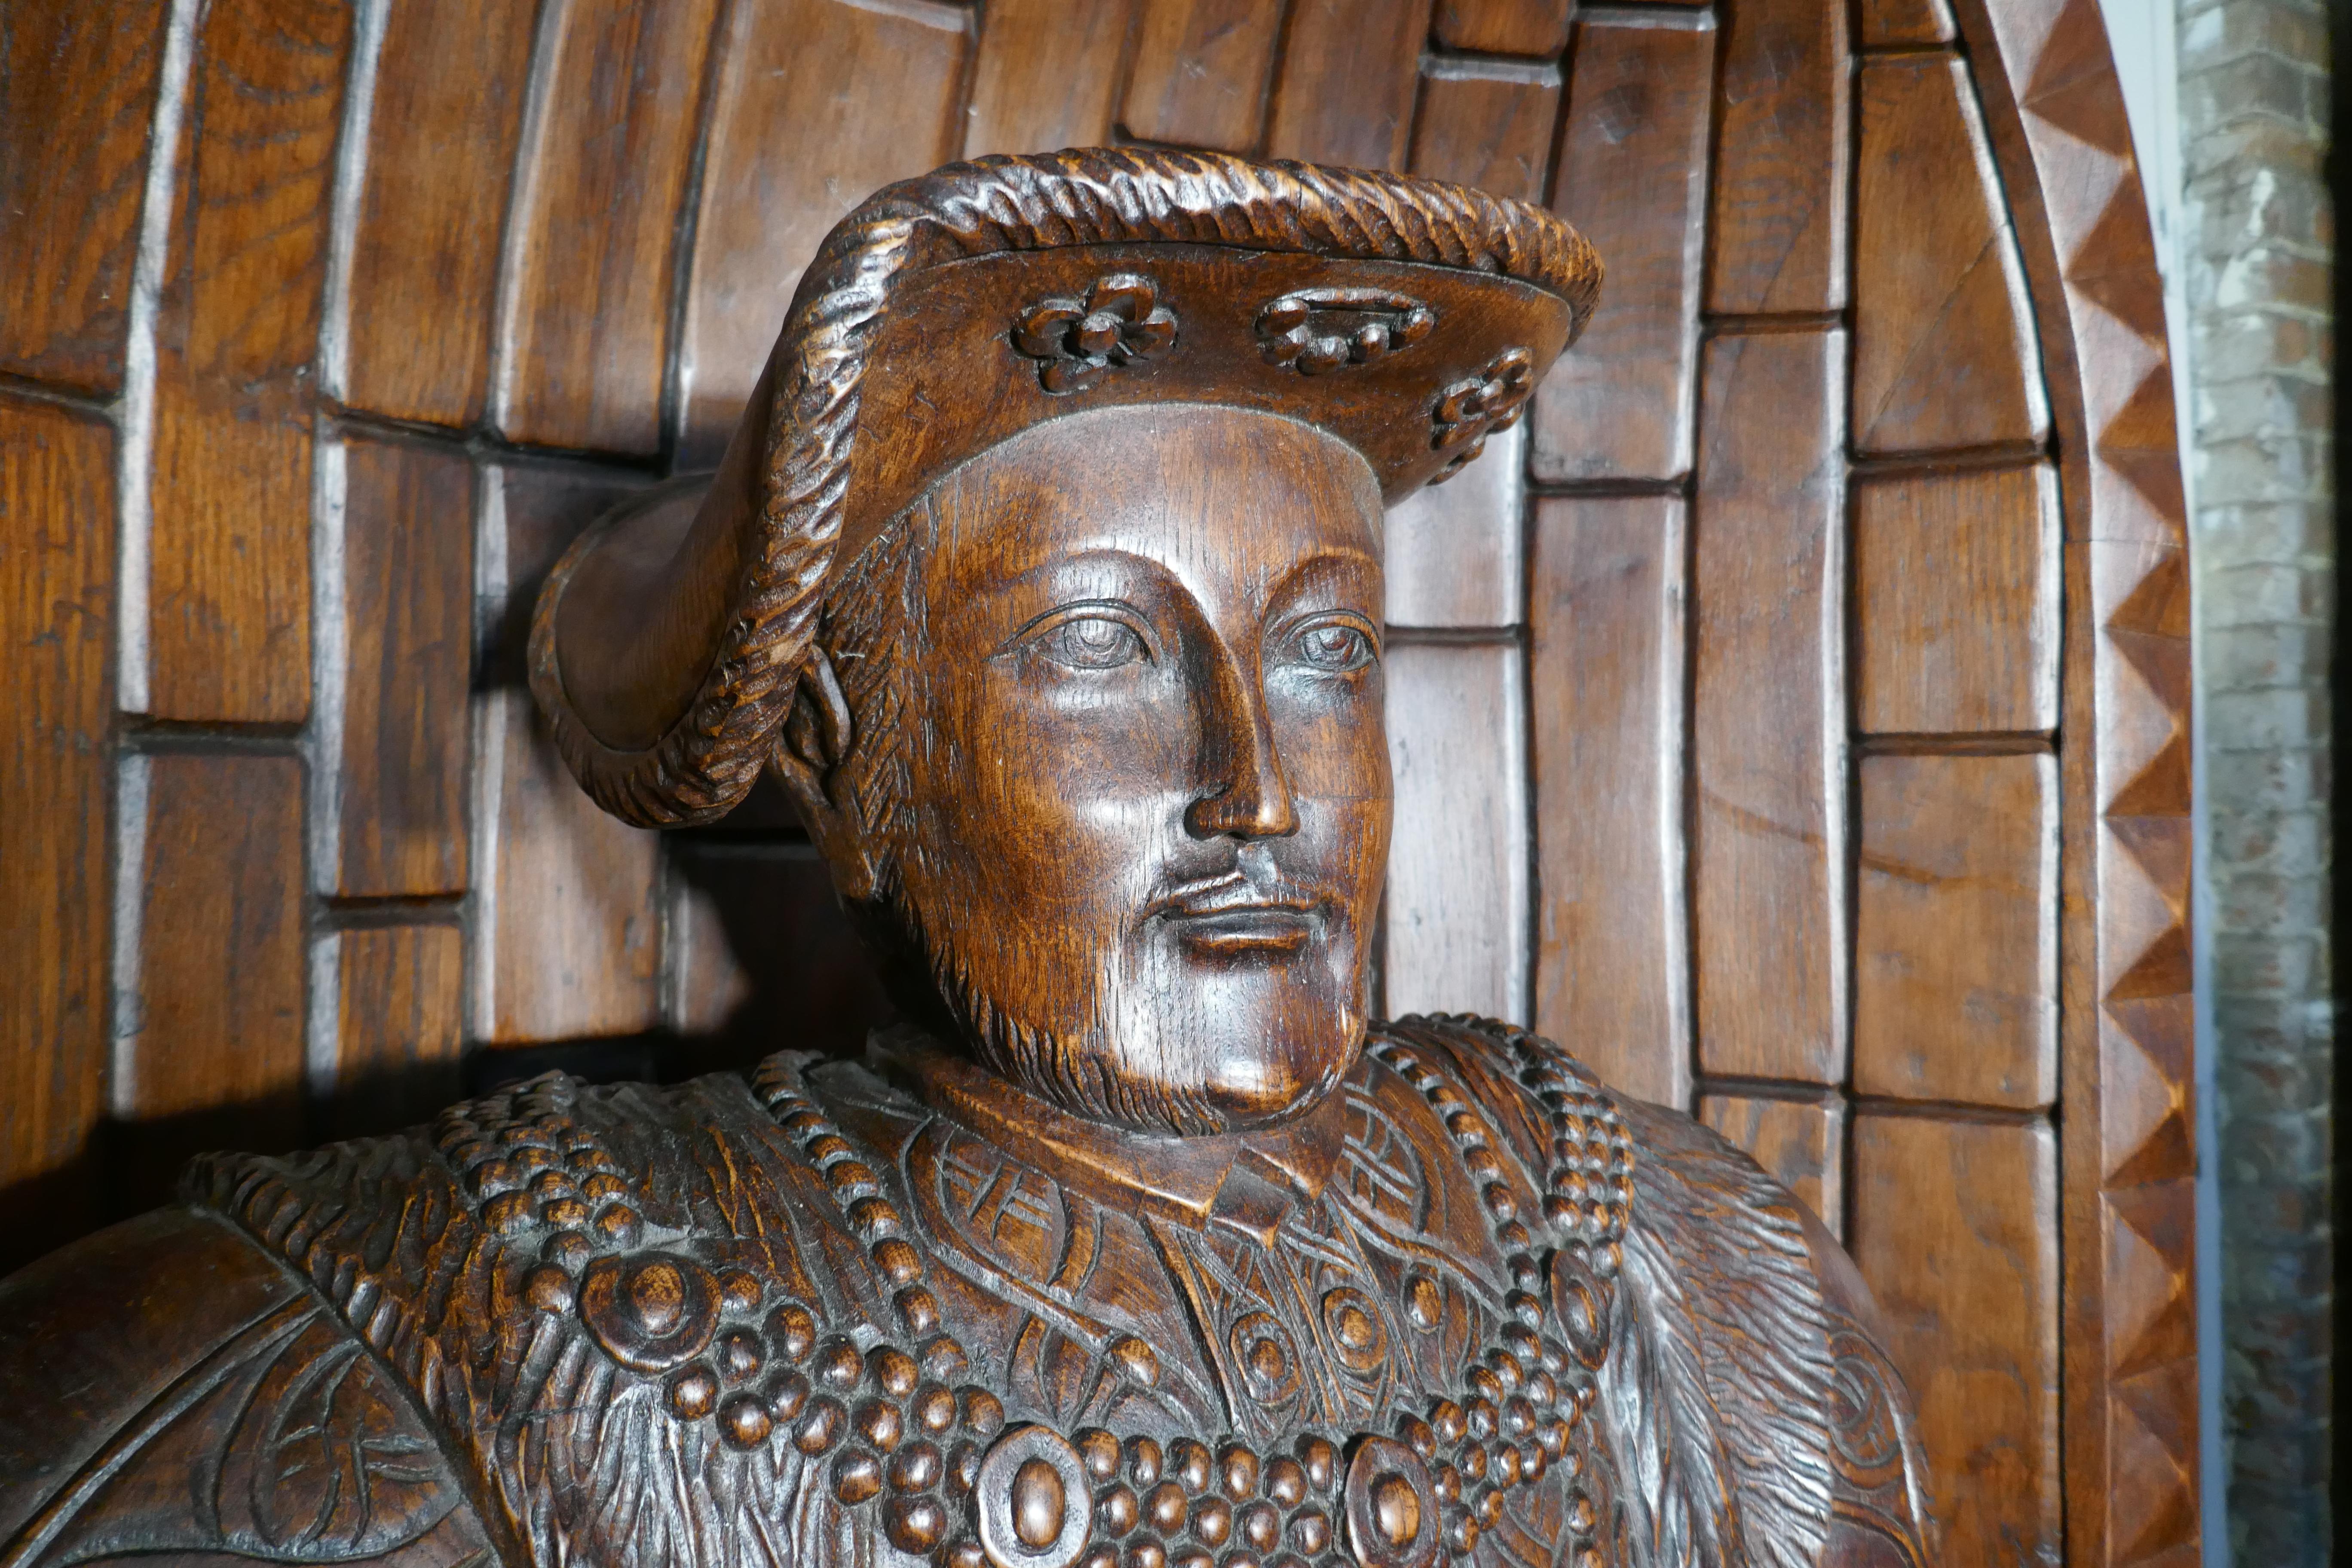 Life size carved oak statue of Henry VIII standing in an 8ft Alcove

This is a mid-20th century piece, it is very impressive and was made for display as part of a theatrical collection of Tudor Clothes
The quality of the carving is extremely fine